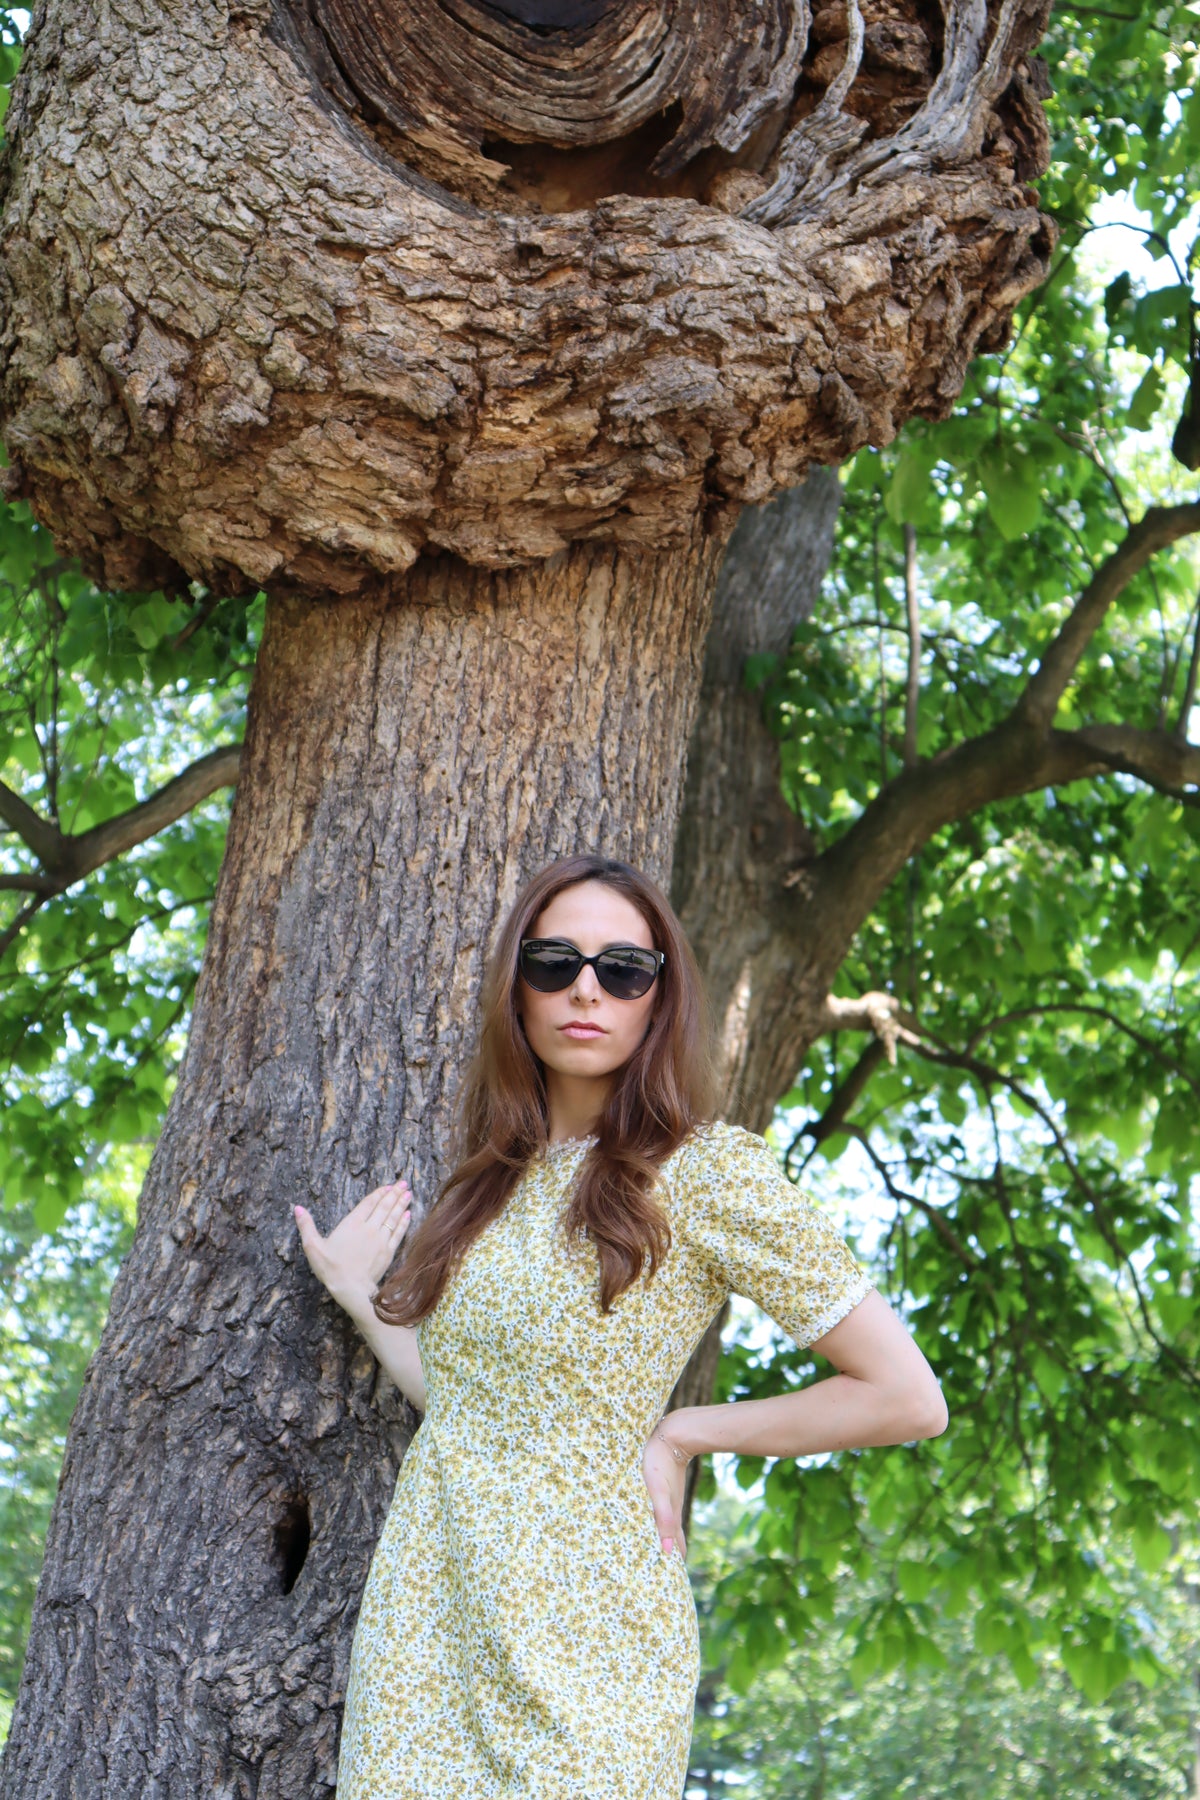 Close up photo of Model in short yellow floral dress with short sleeves and white daisy trim leaning on a tree.